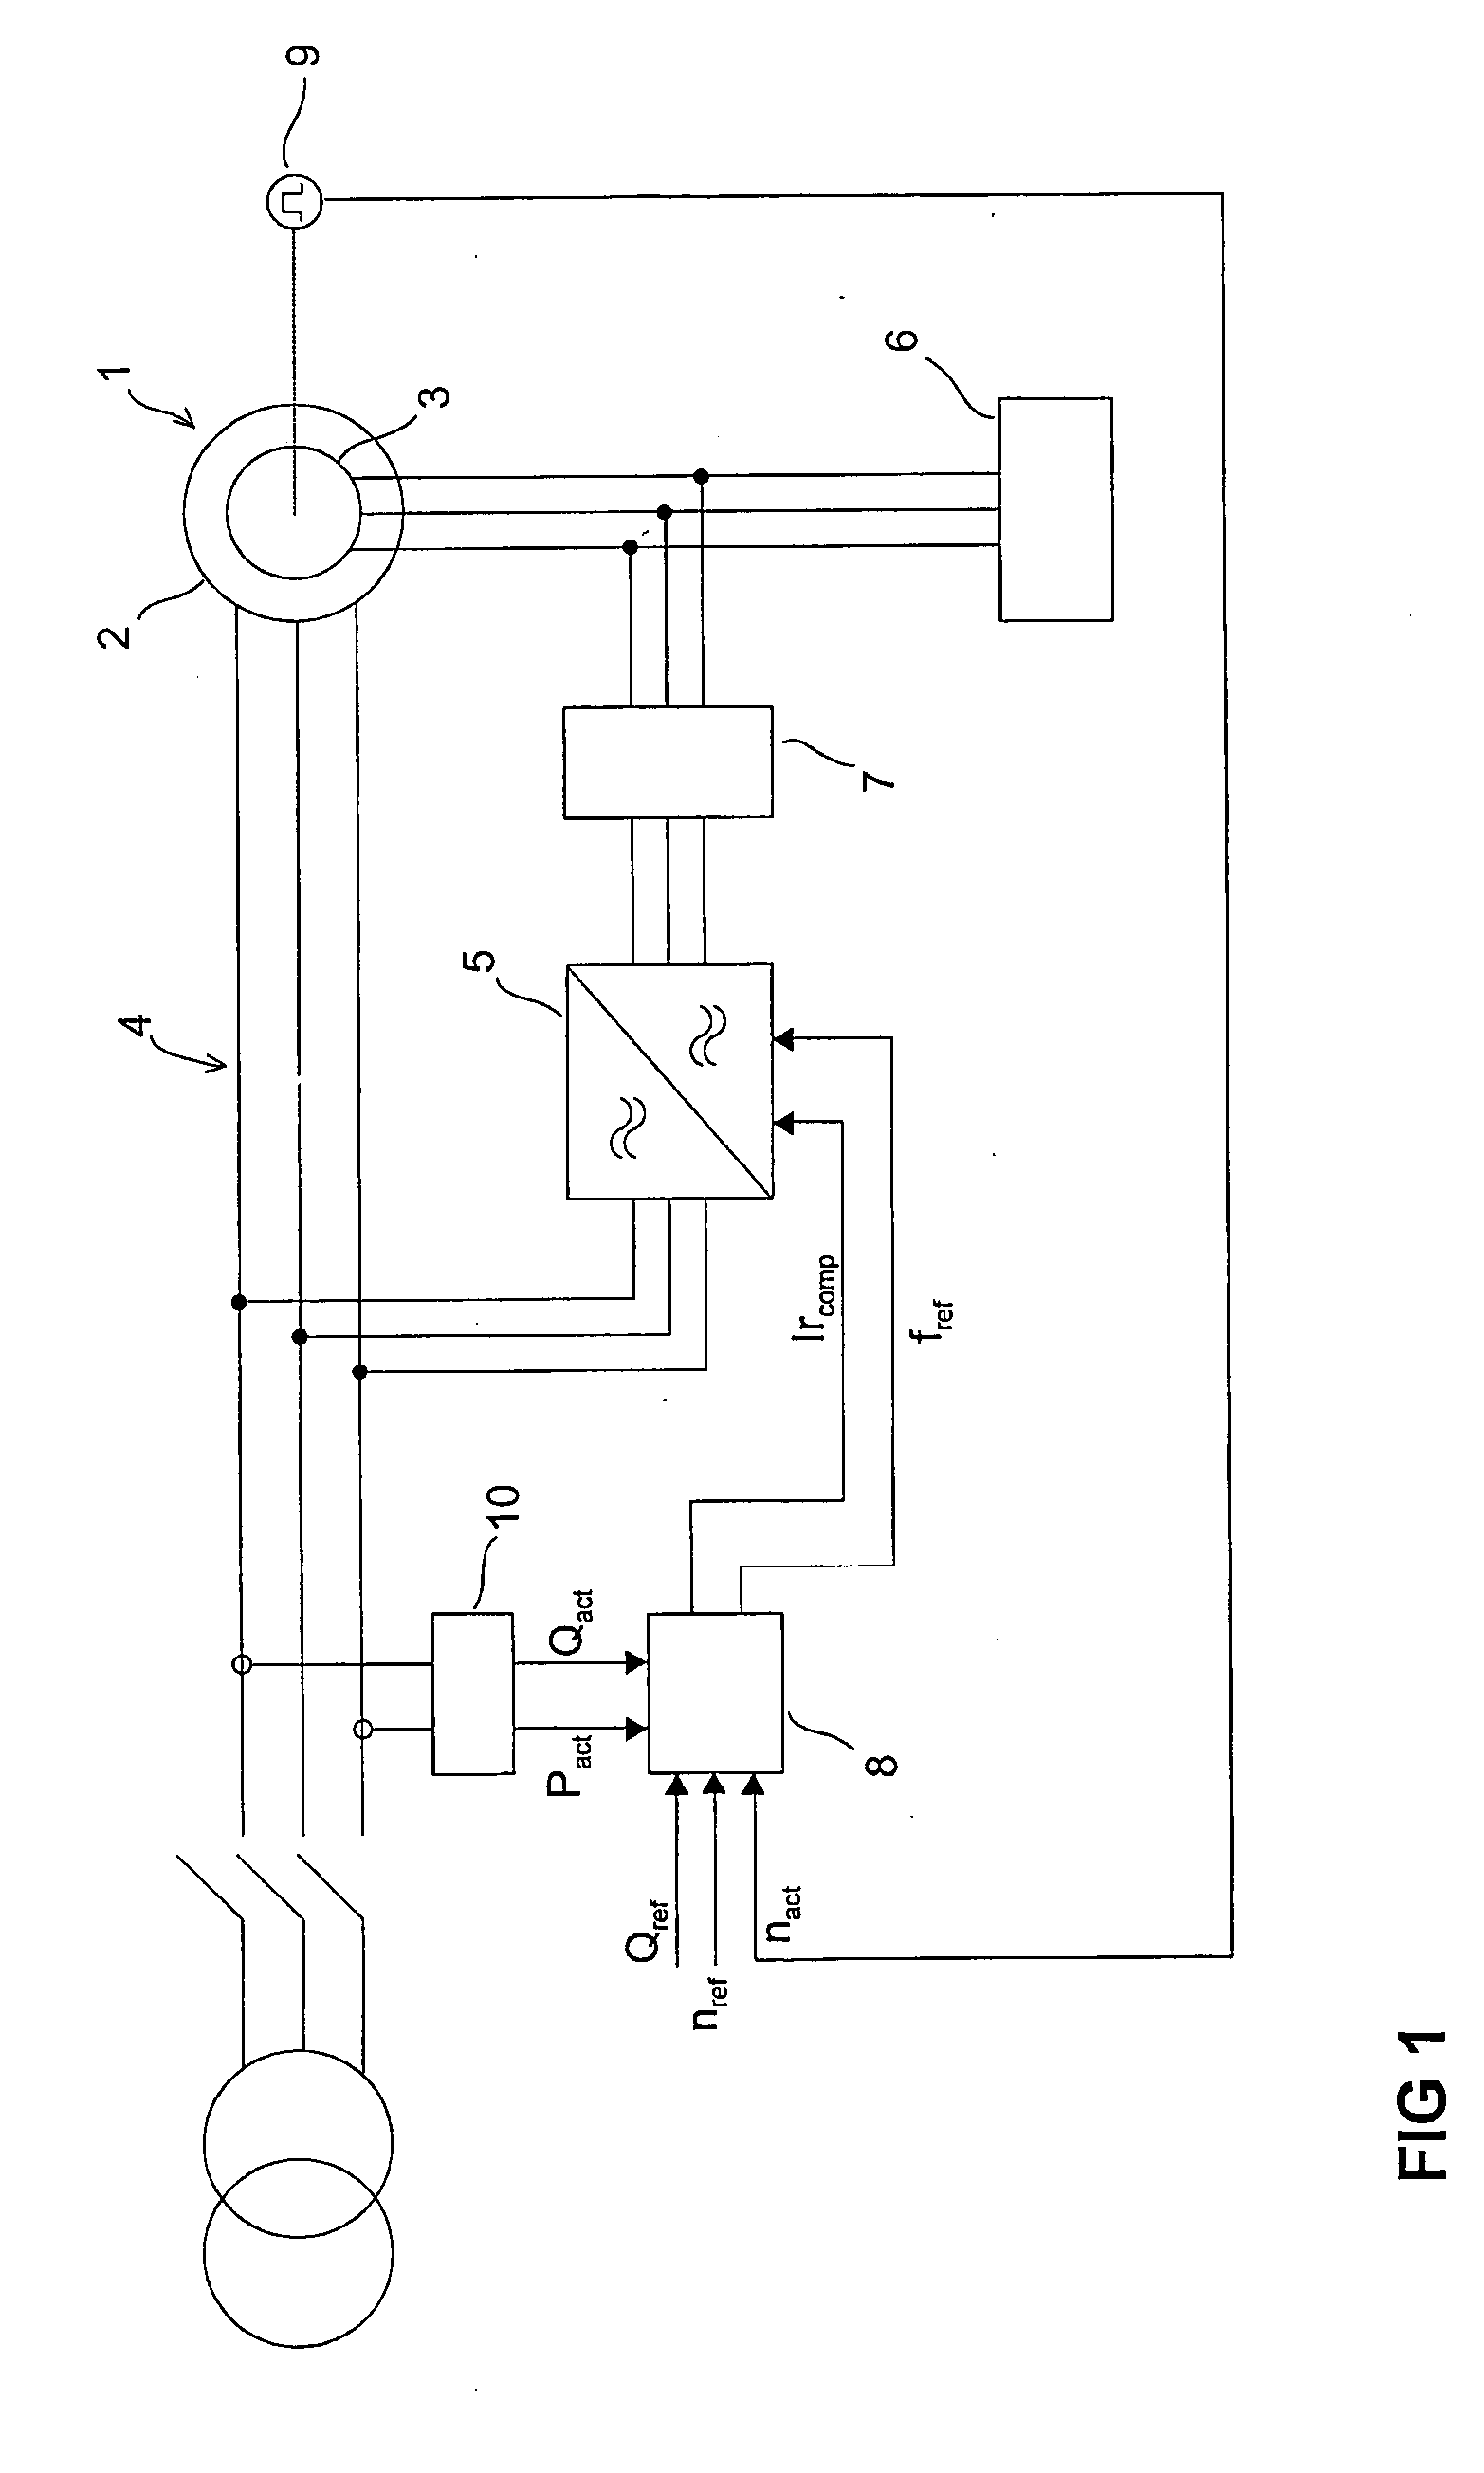 Method for controlling doubly-fed machine